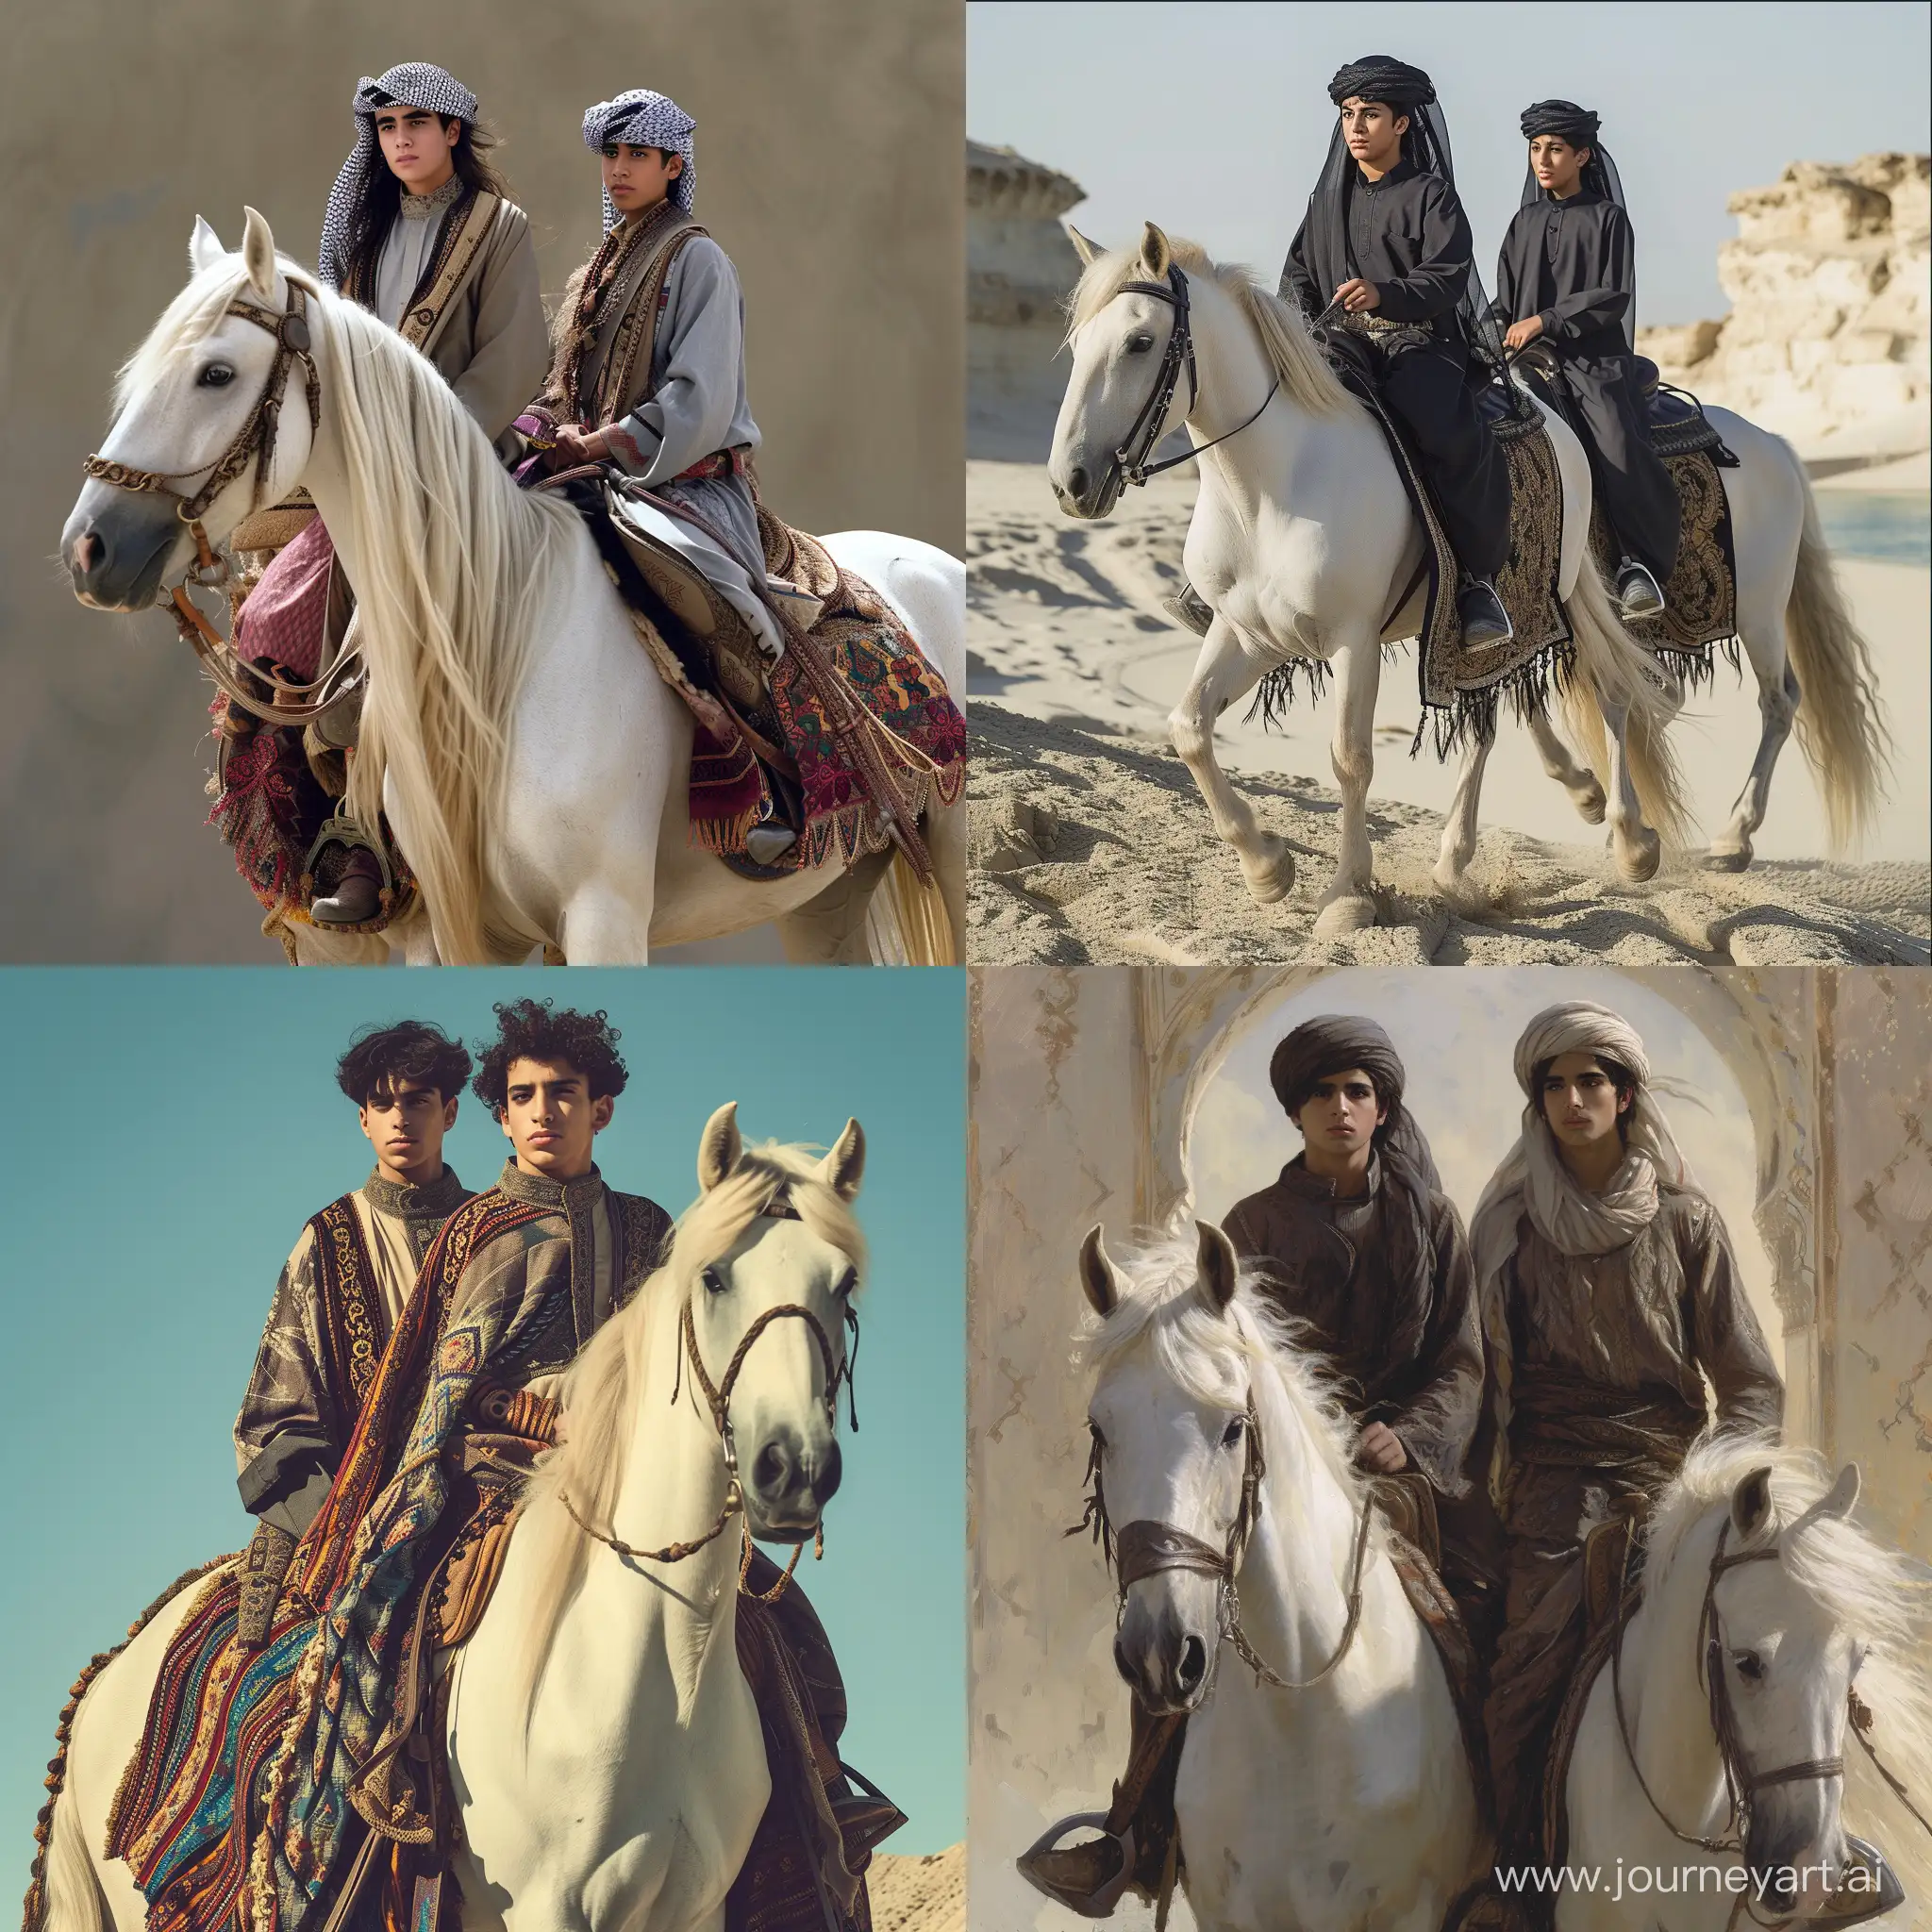 two young man in Middle East style riding on the same white horse with long body.